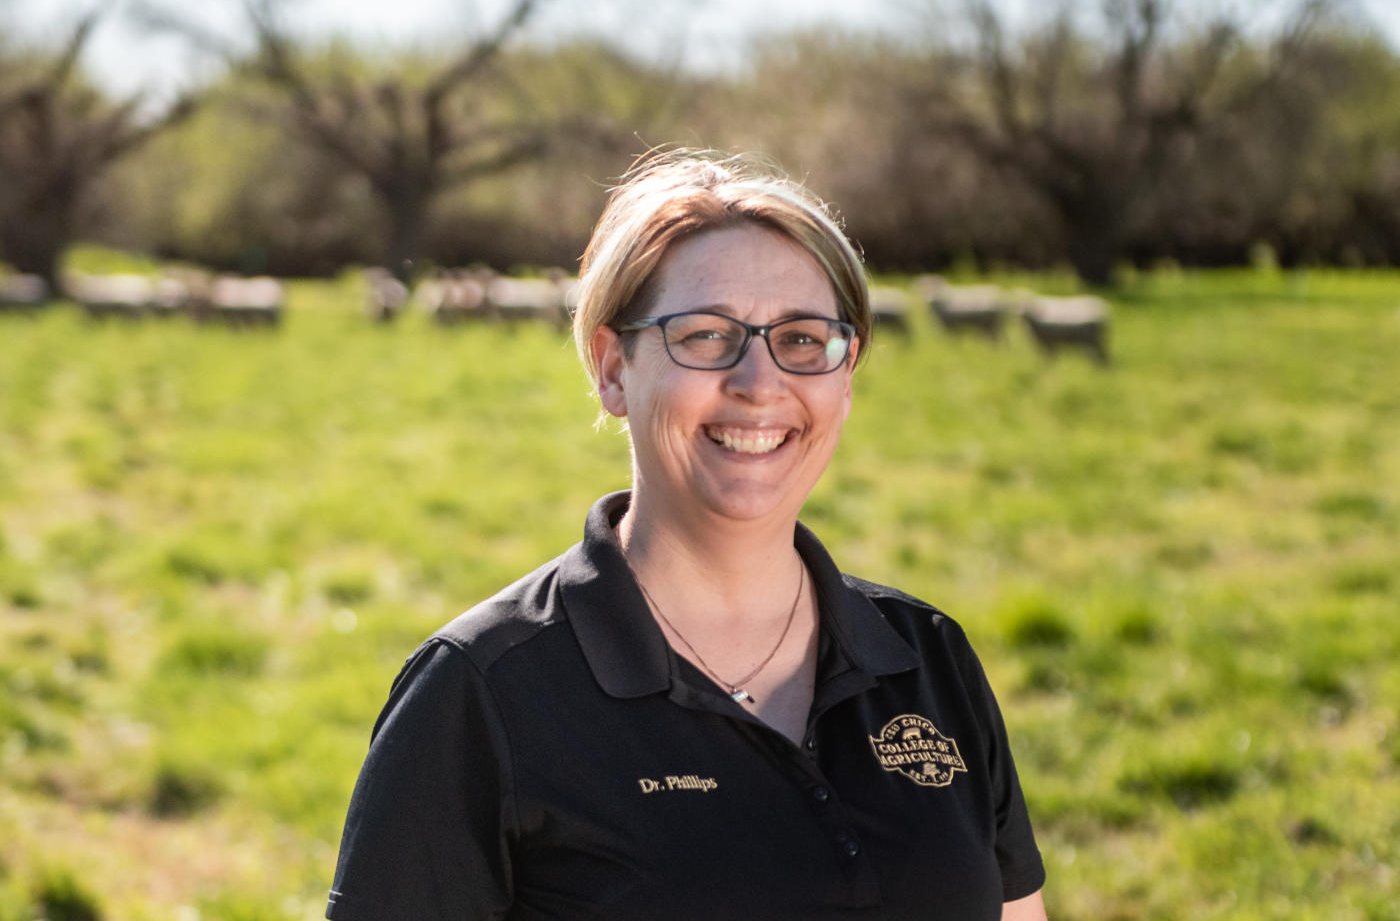 Portrait of Celina Phillips with sheep in a field behind her.